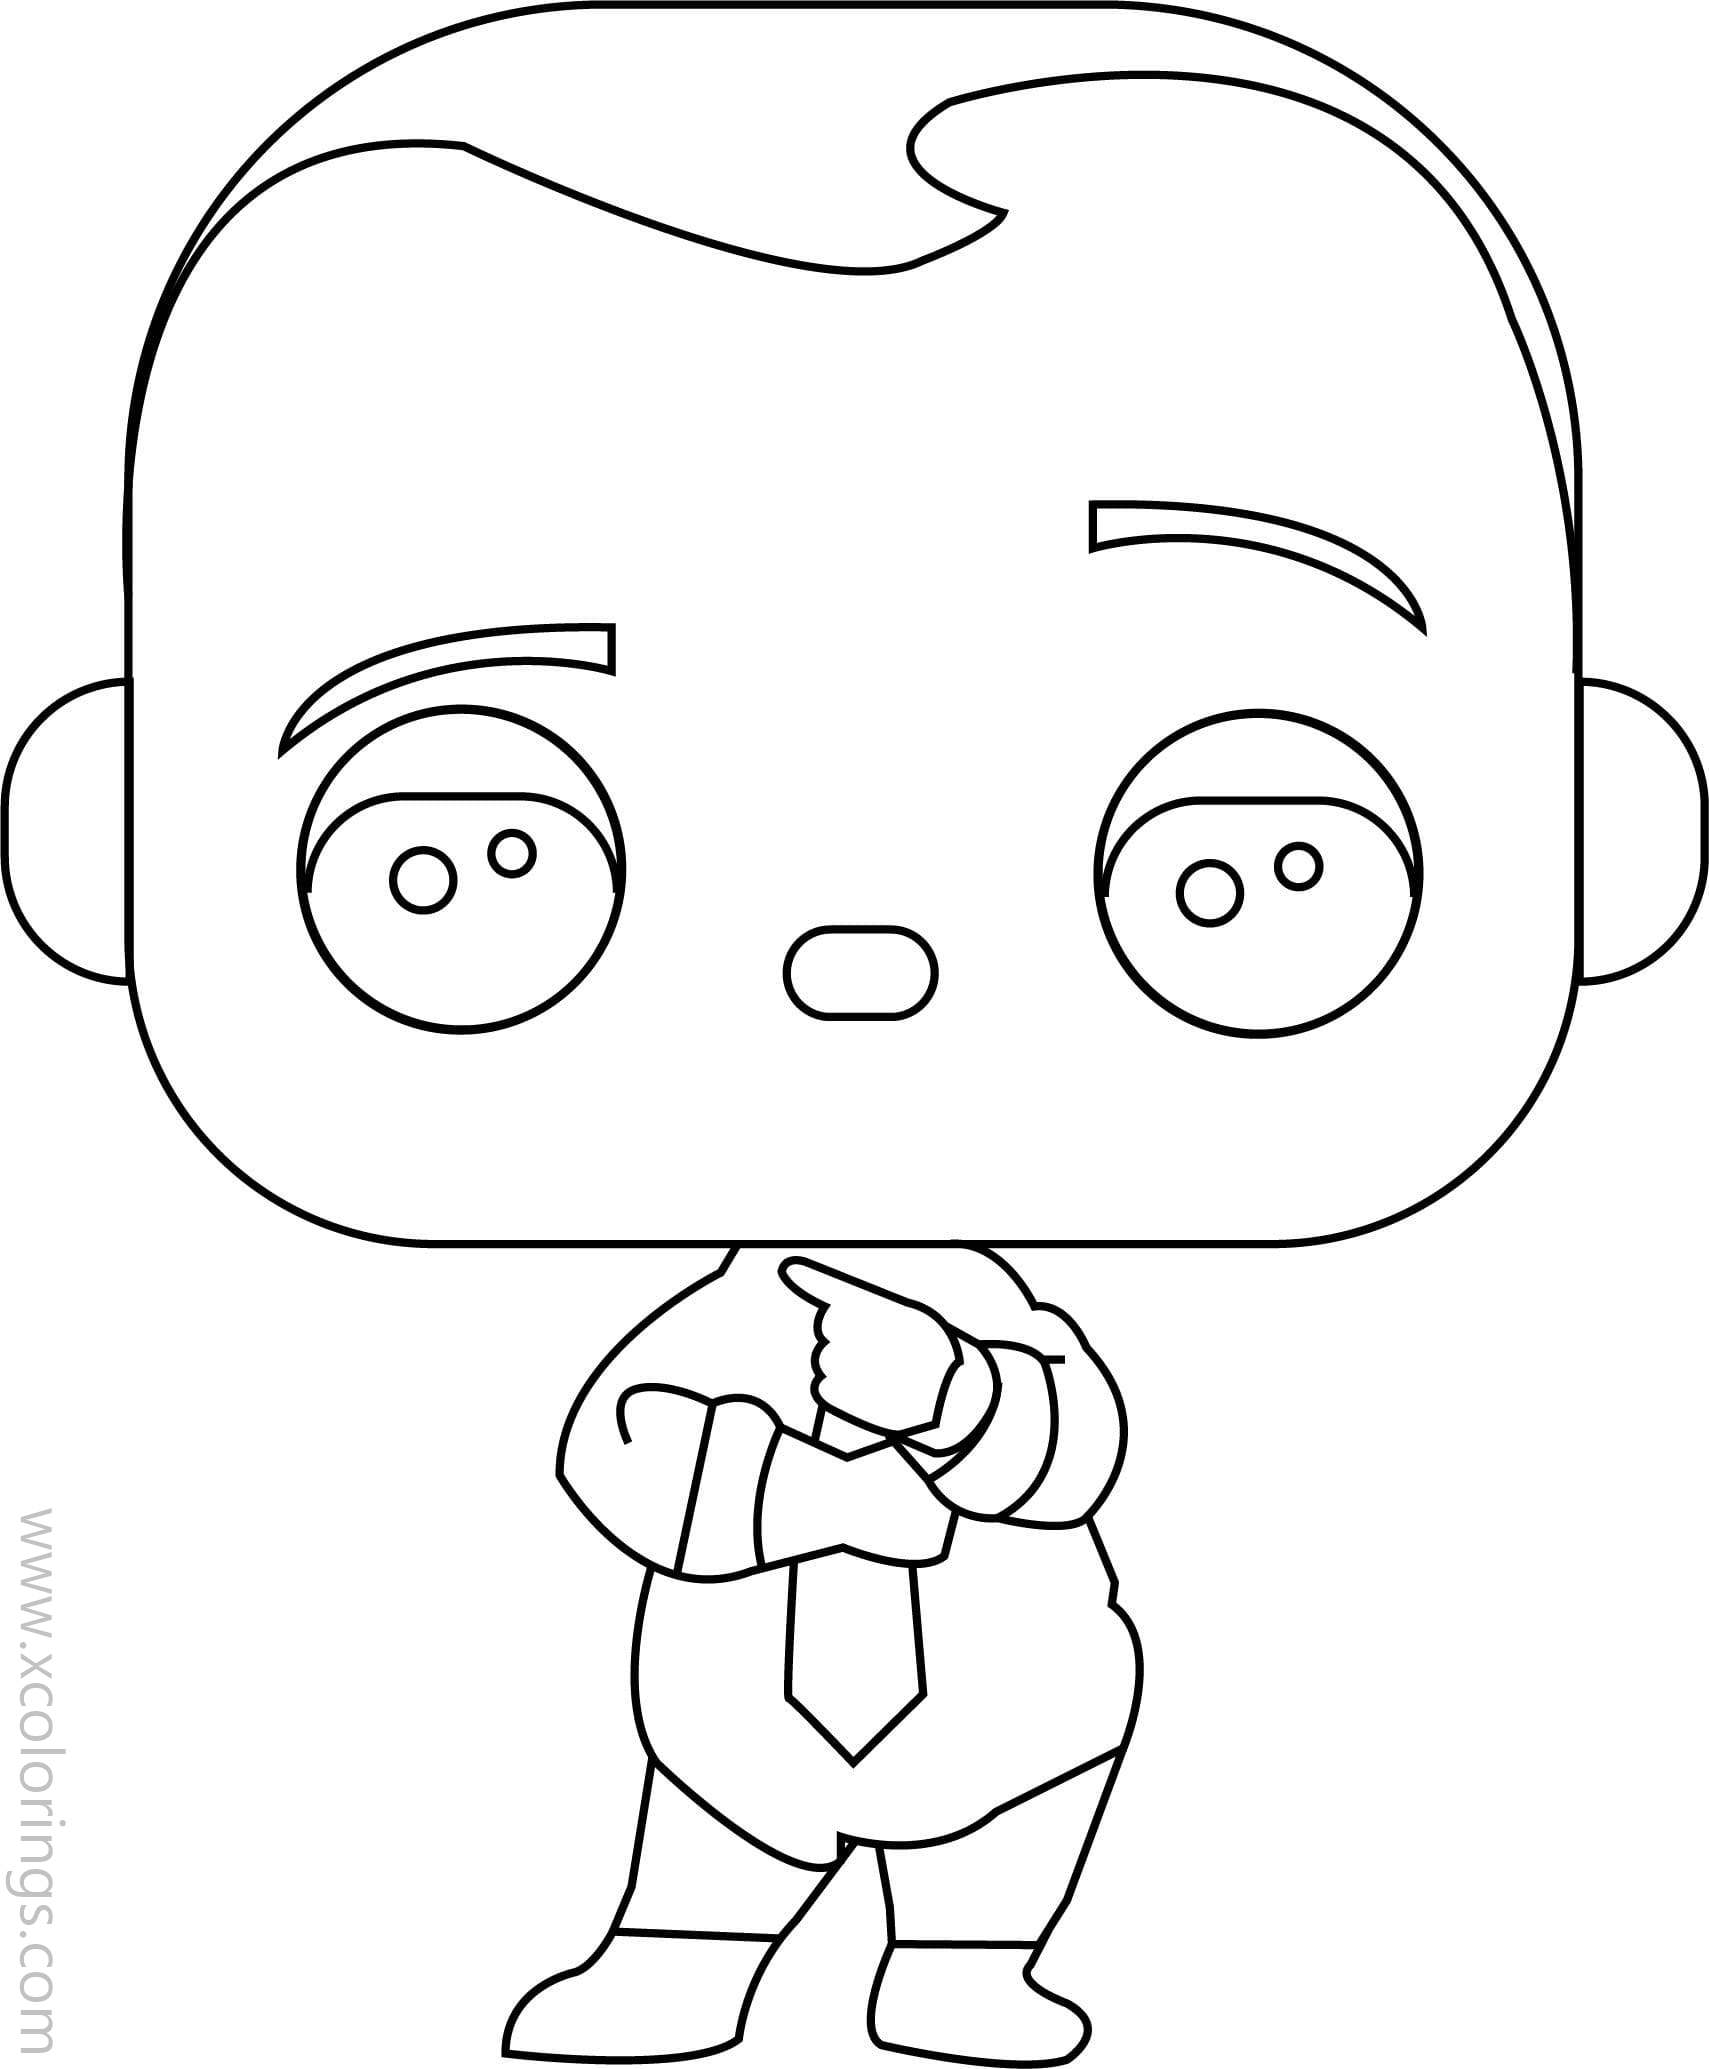 Free Funko POP Coloring Pages Boss Baby printable